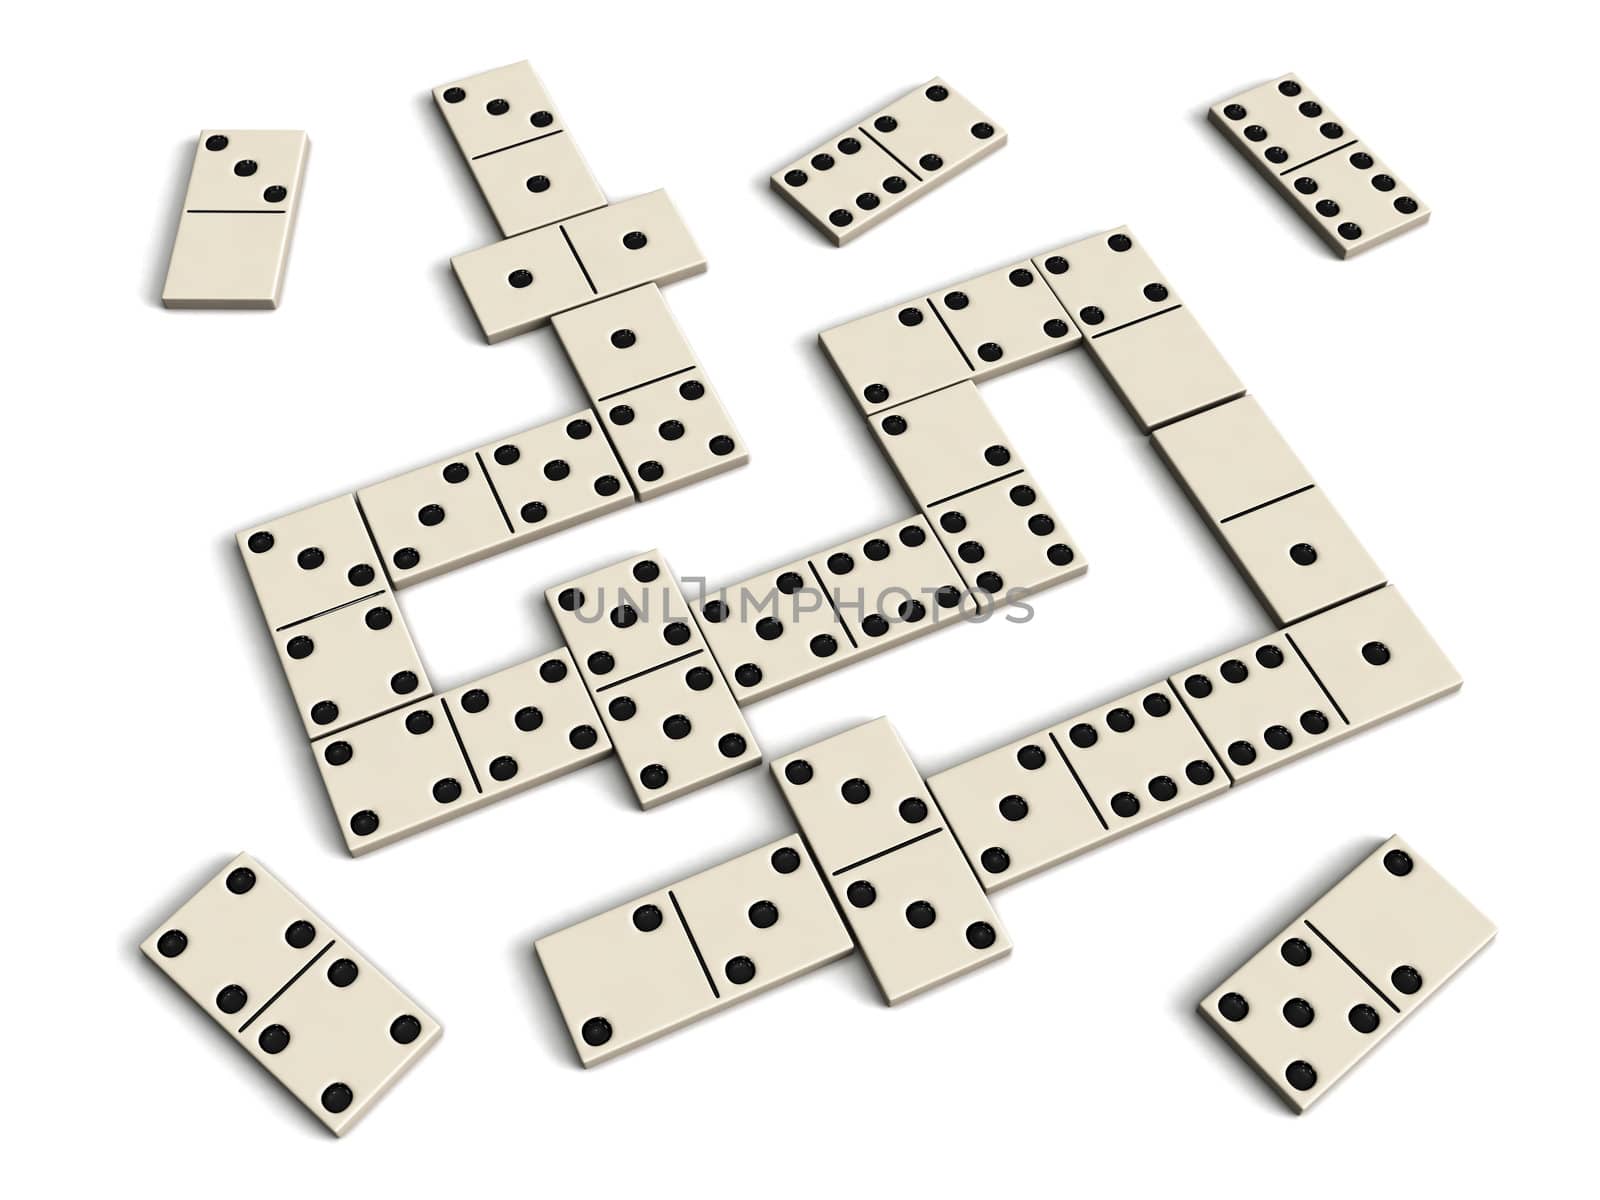 Domino game by dimol